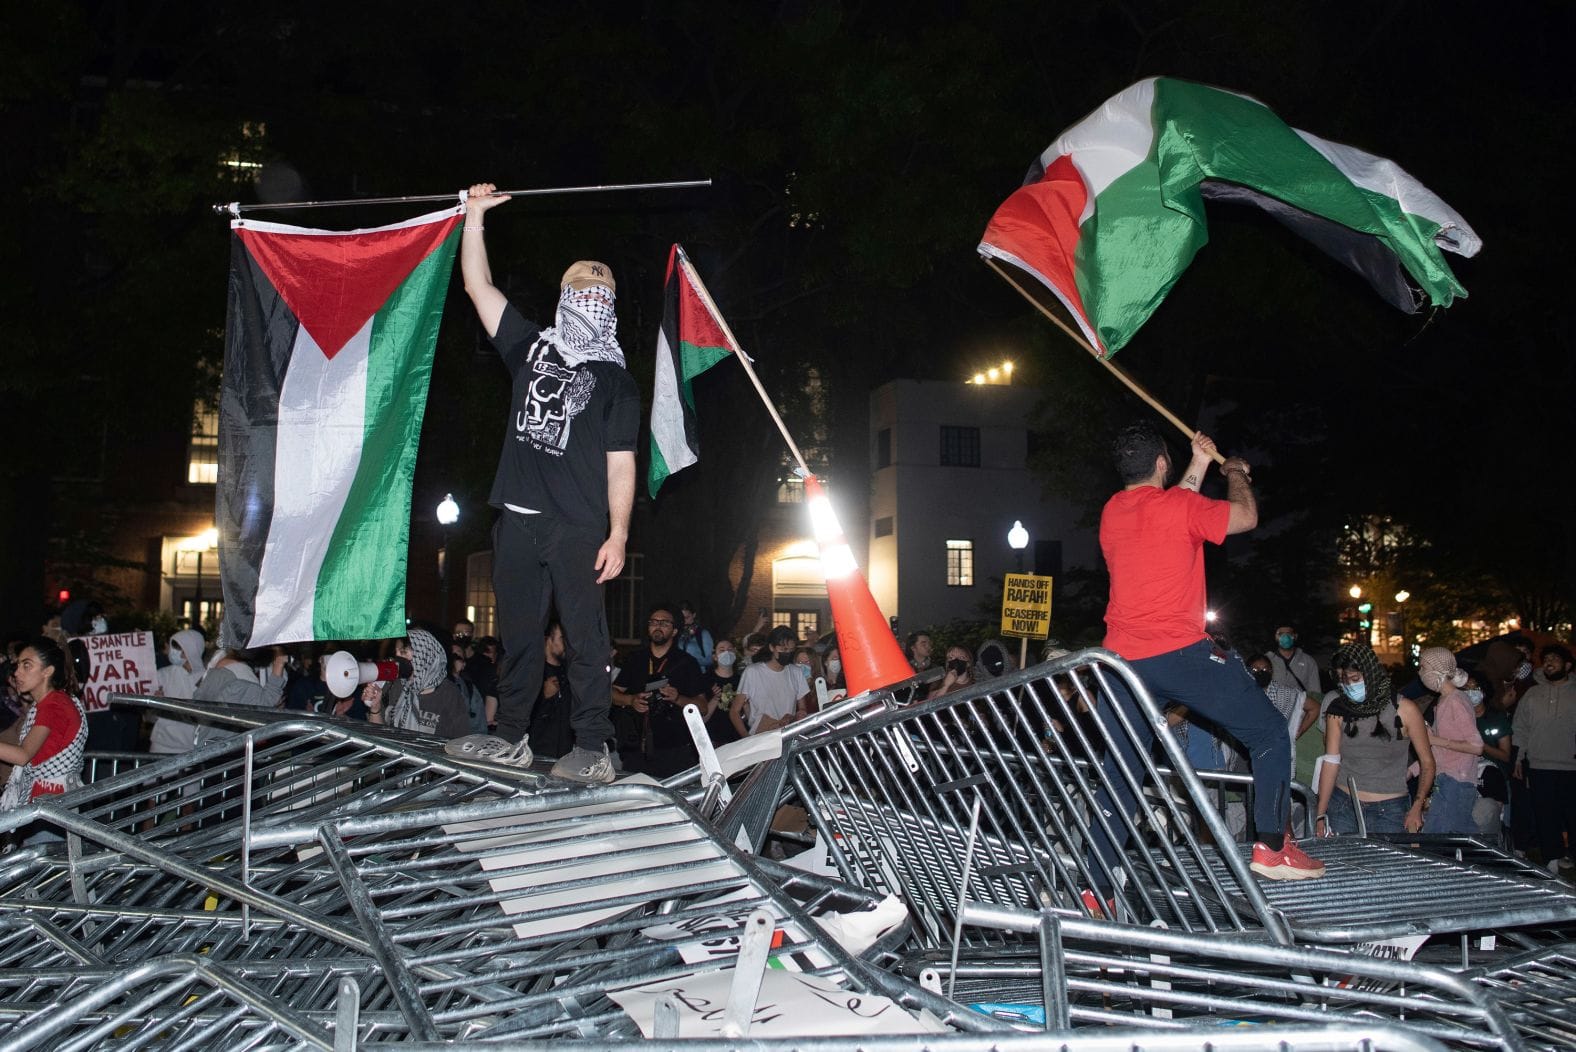 People waiving Palestinians flags on top of a pile of barriers, with a crowd in the background.